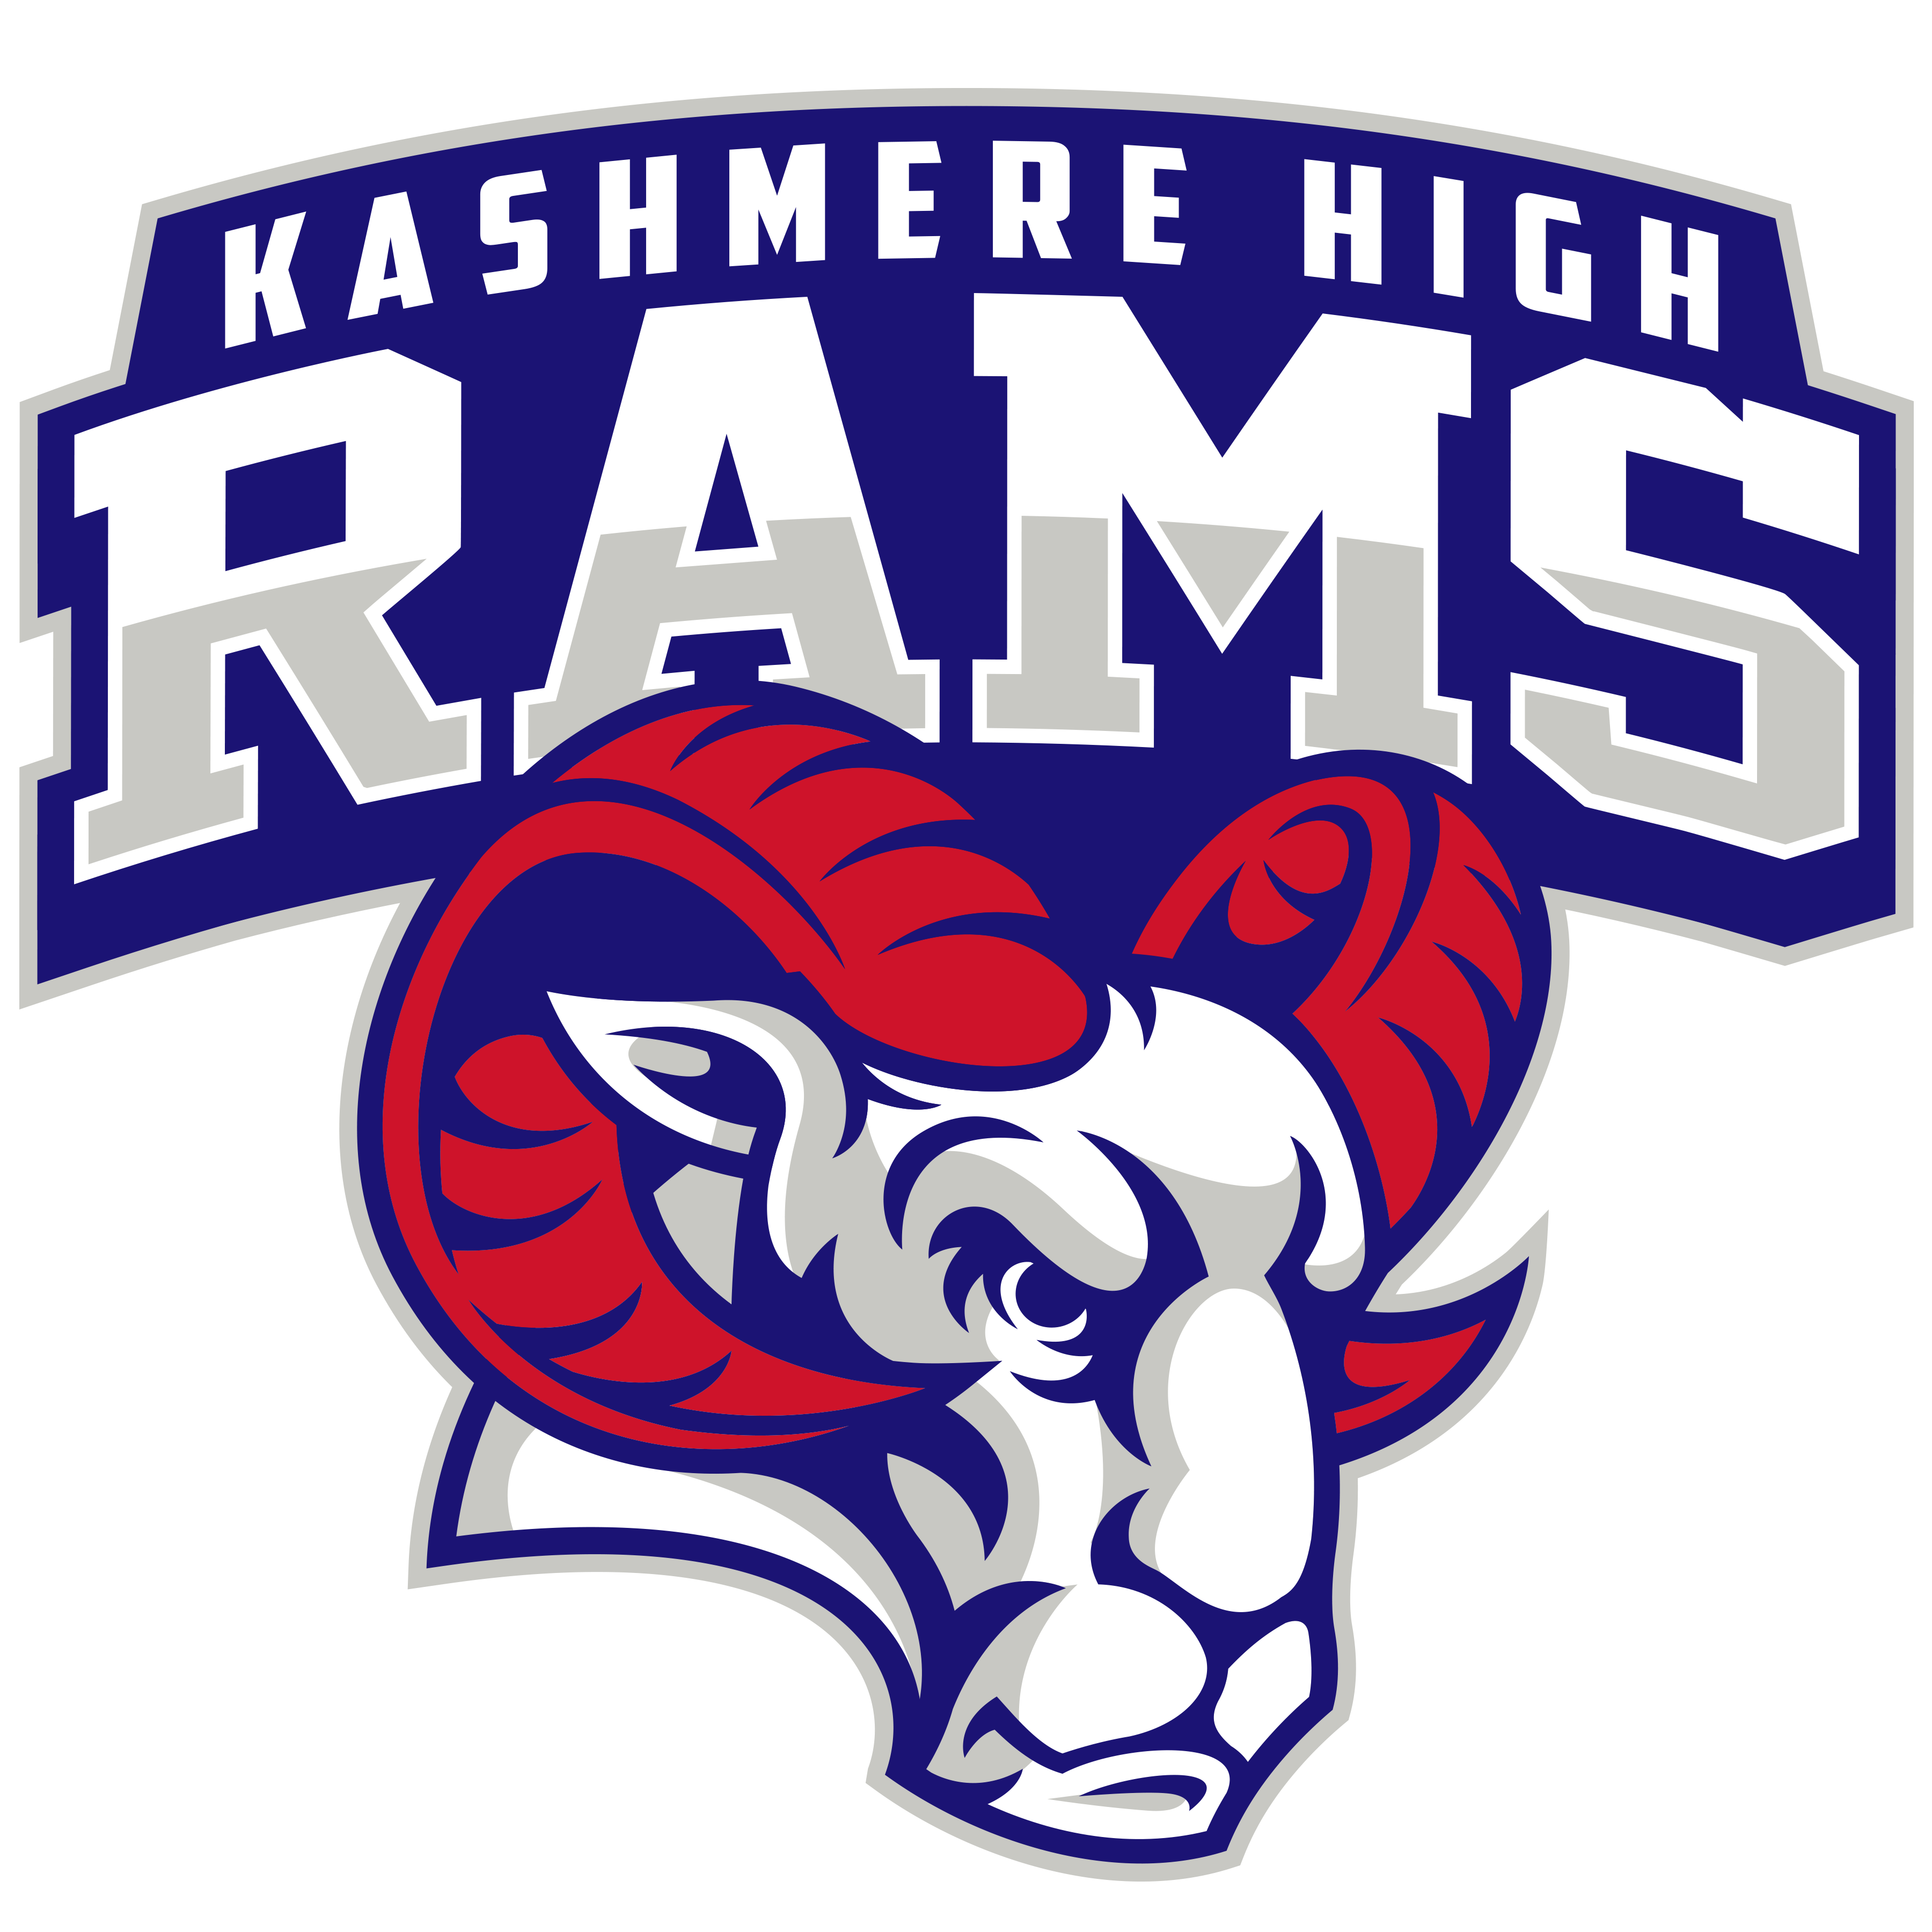 Kashmere High Logo logo design by logo designer Robot Agency Studios for your inspiration and for the worlds largest logo competition